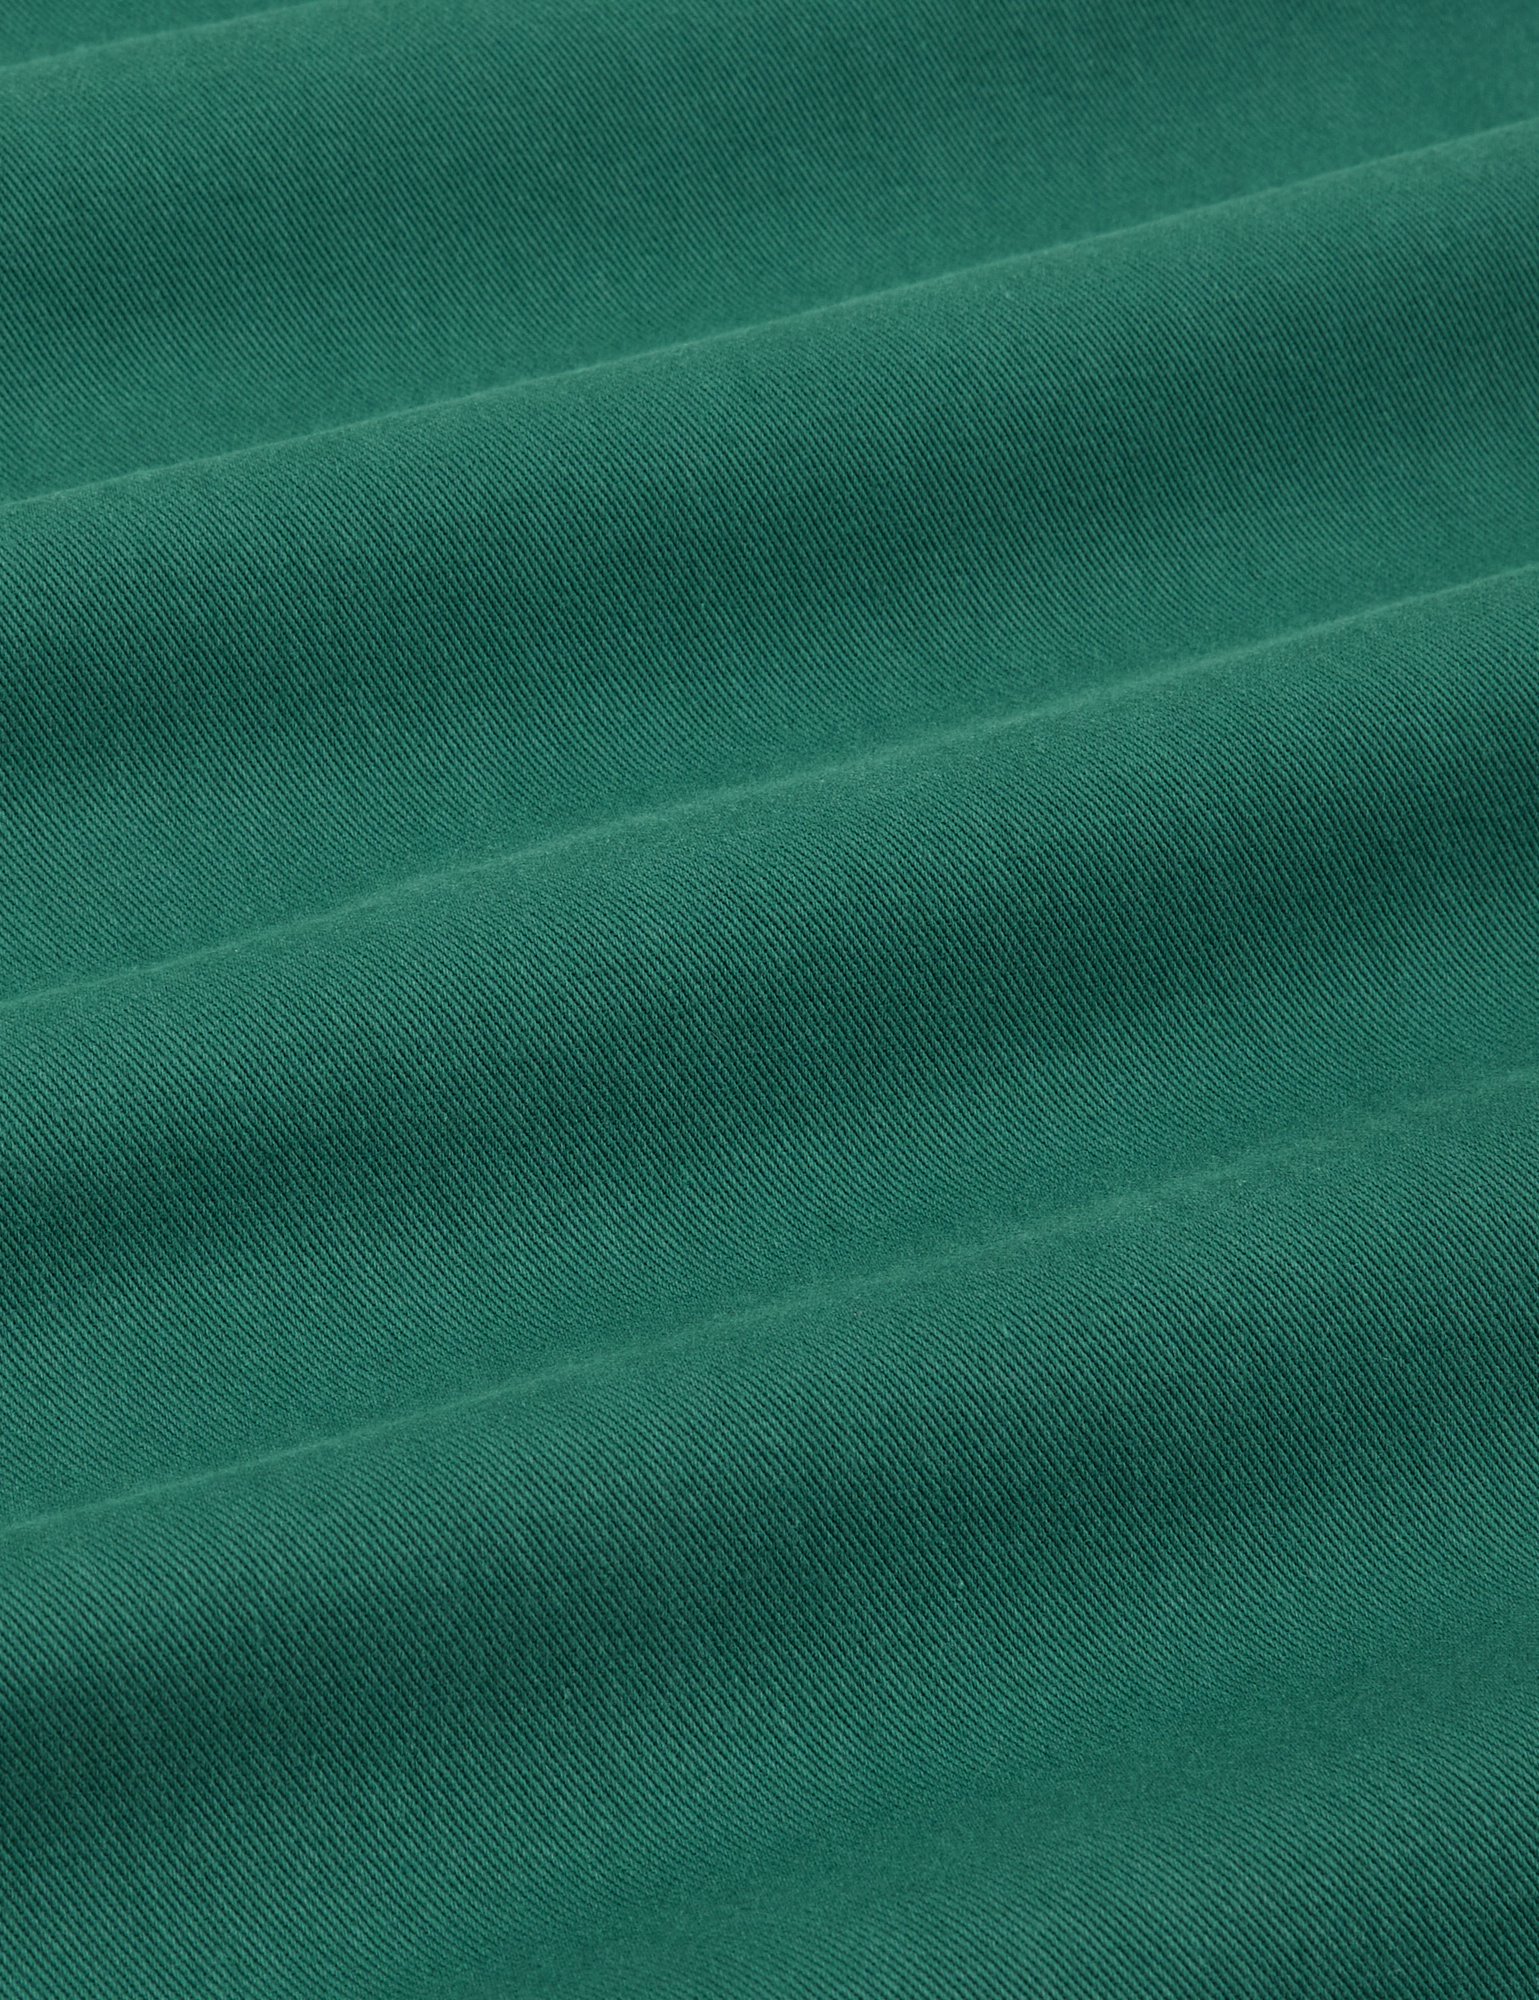 Heavyweight Trousers in Hunter Green fabric detail close up